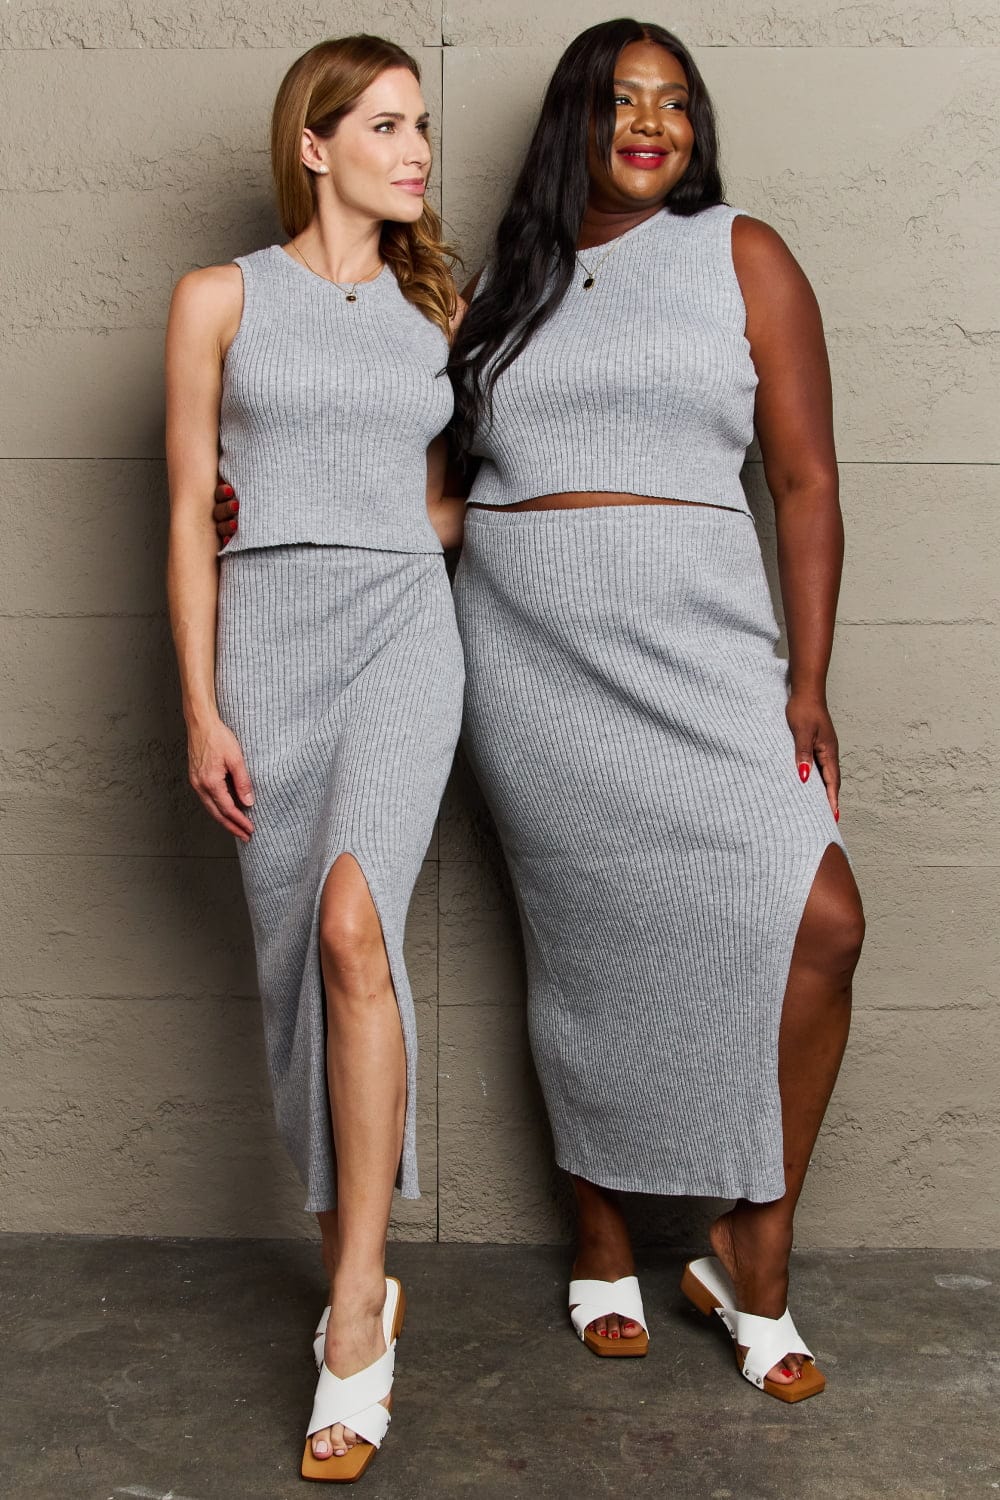 Sew In Love She's All That Fitted Two-Piece Skirt Set - CLASSY CLOSET BOUTIQUESew In Love She's All That Fitted Two-Piece Skirt Setsets100102807574927100102807574927CharcoalS